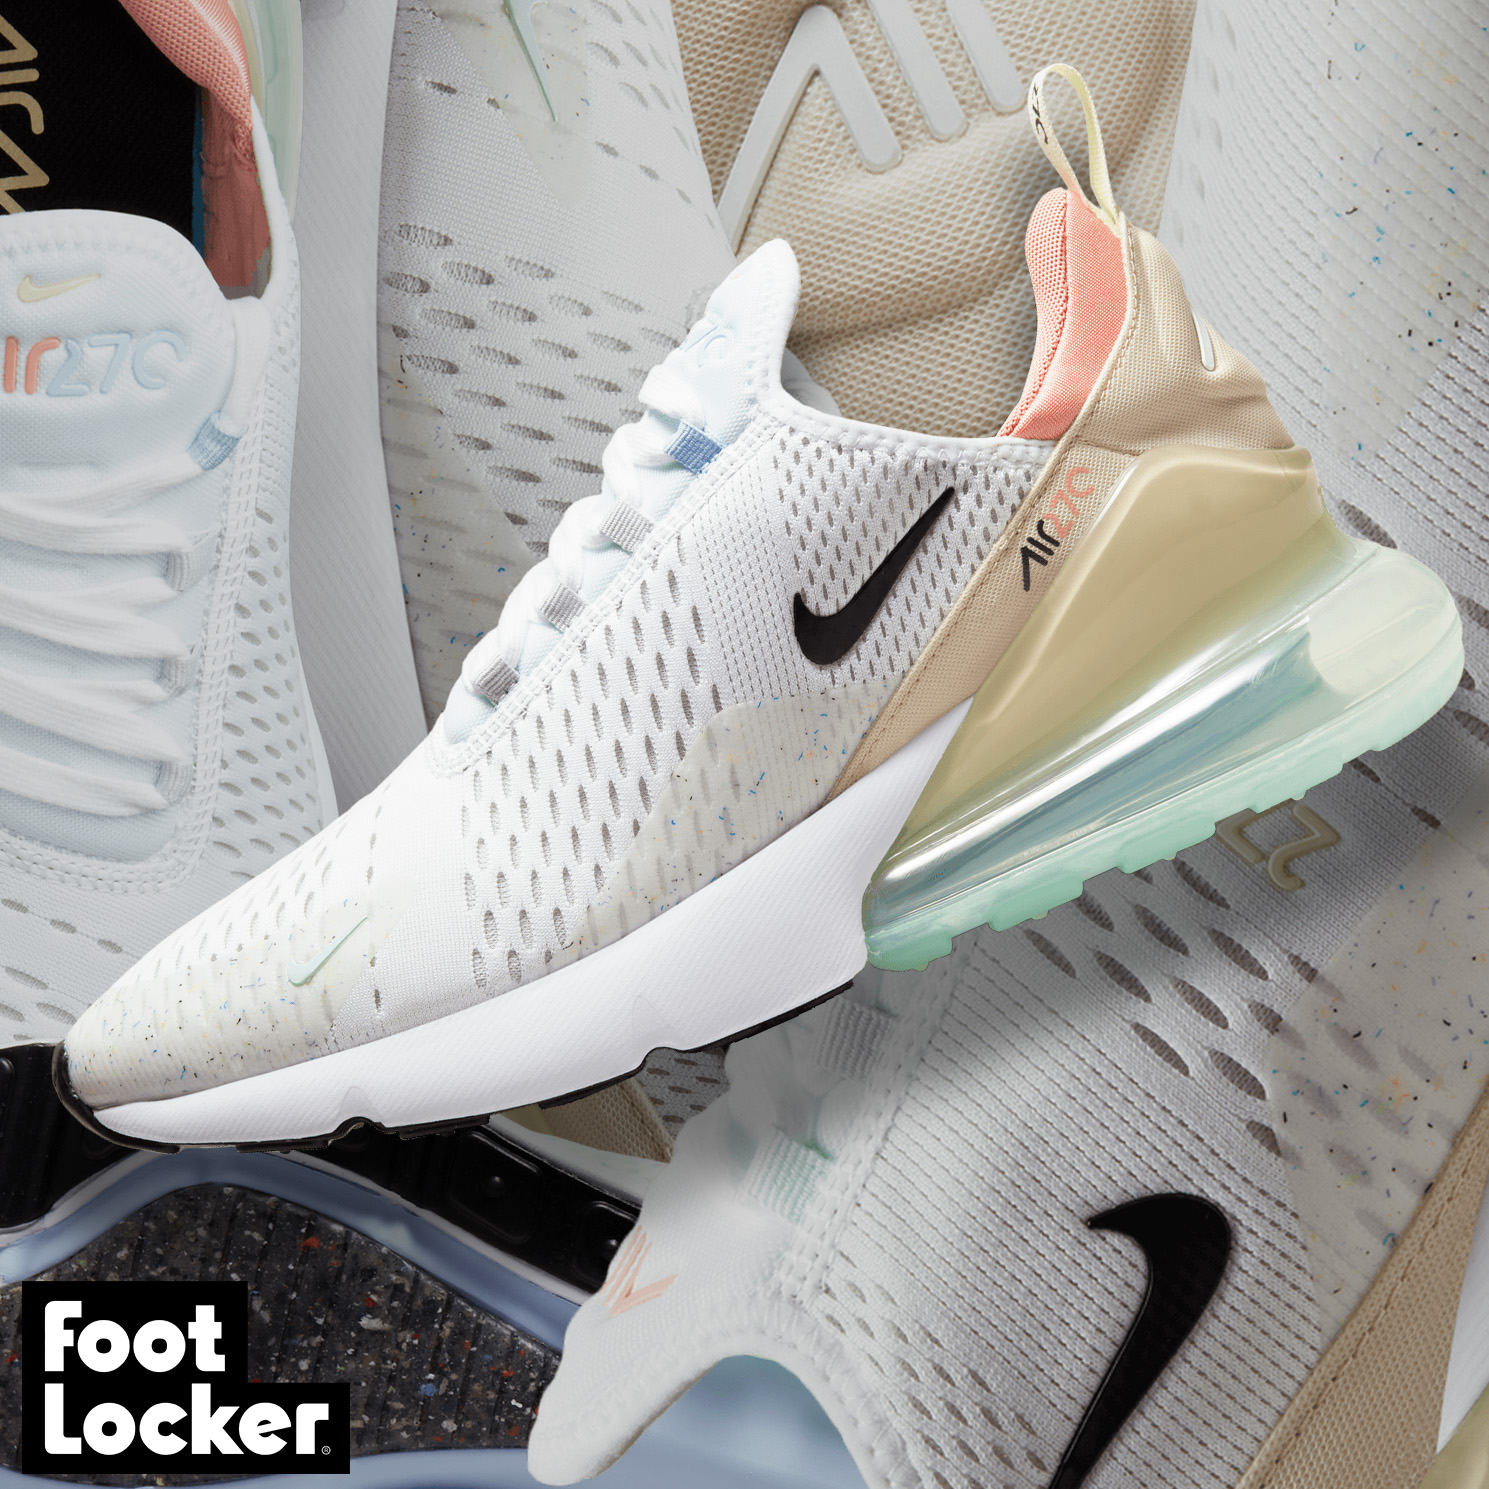 Foot Twitter: "Spring ready 🔥 #Nike Air Max 270 available online + select stores Shop: https://t.co/mWgE4B8s70 https://t.co/dFvSGqlasw" / Twitter